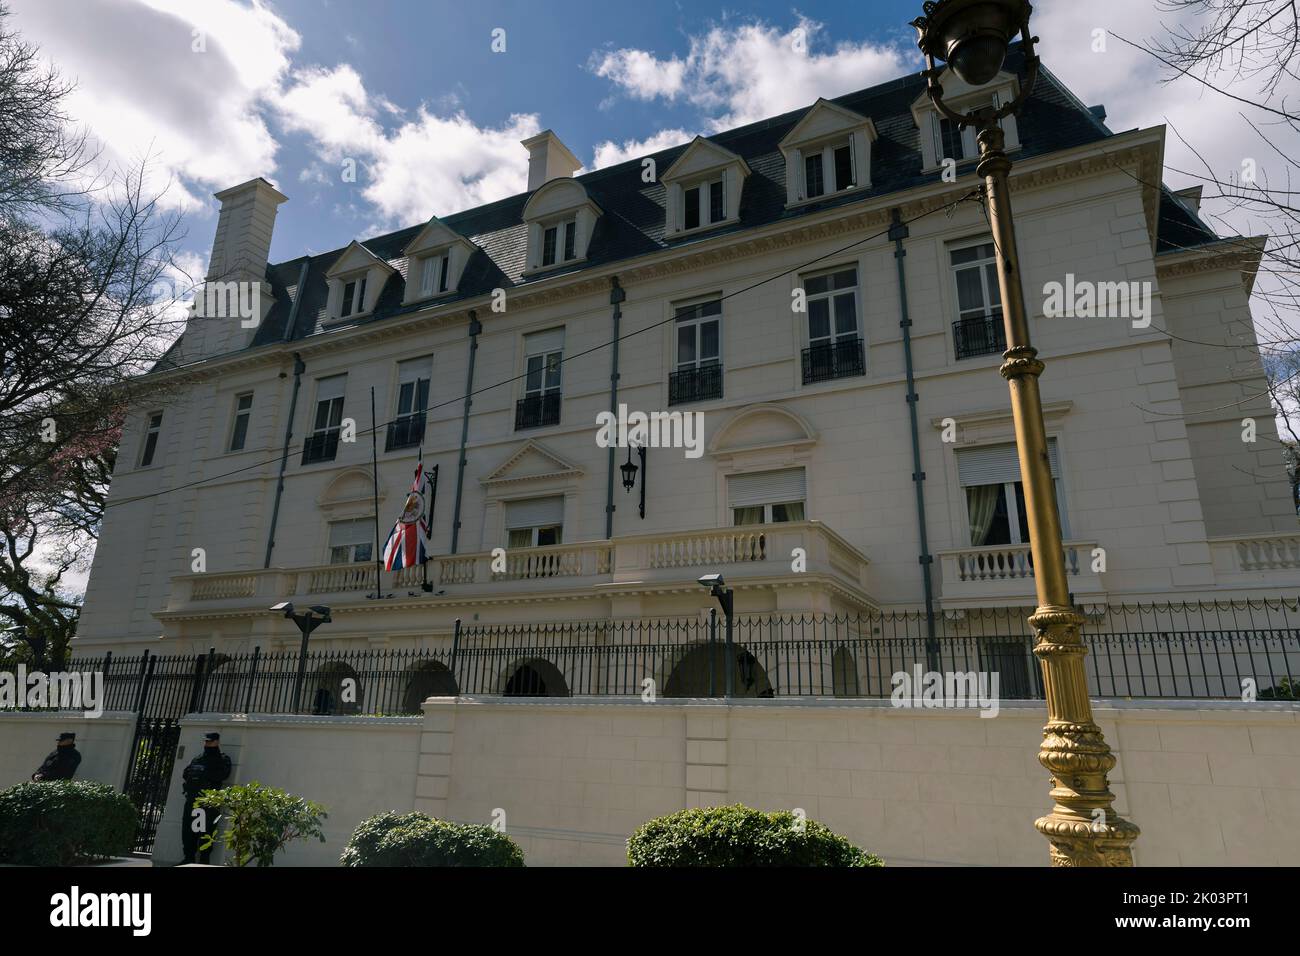 Buenos Aires, Argentina, 9th September, 2022. The house of the British Ambassador with the flag of his country at half-staff for the death of Her Majesty Queen Elizabeth II. (Credit: Esteban Osorio/Alamy Live News) Stock Photo